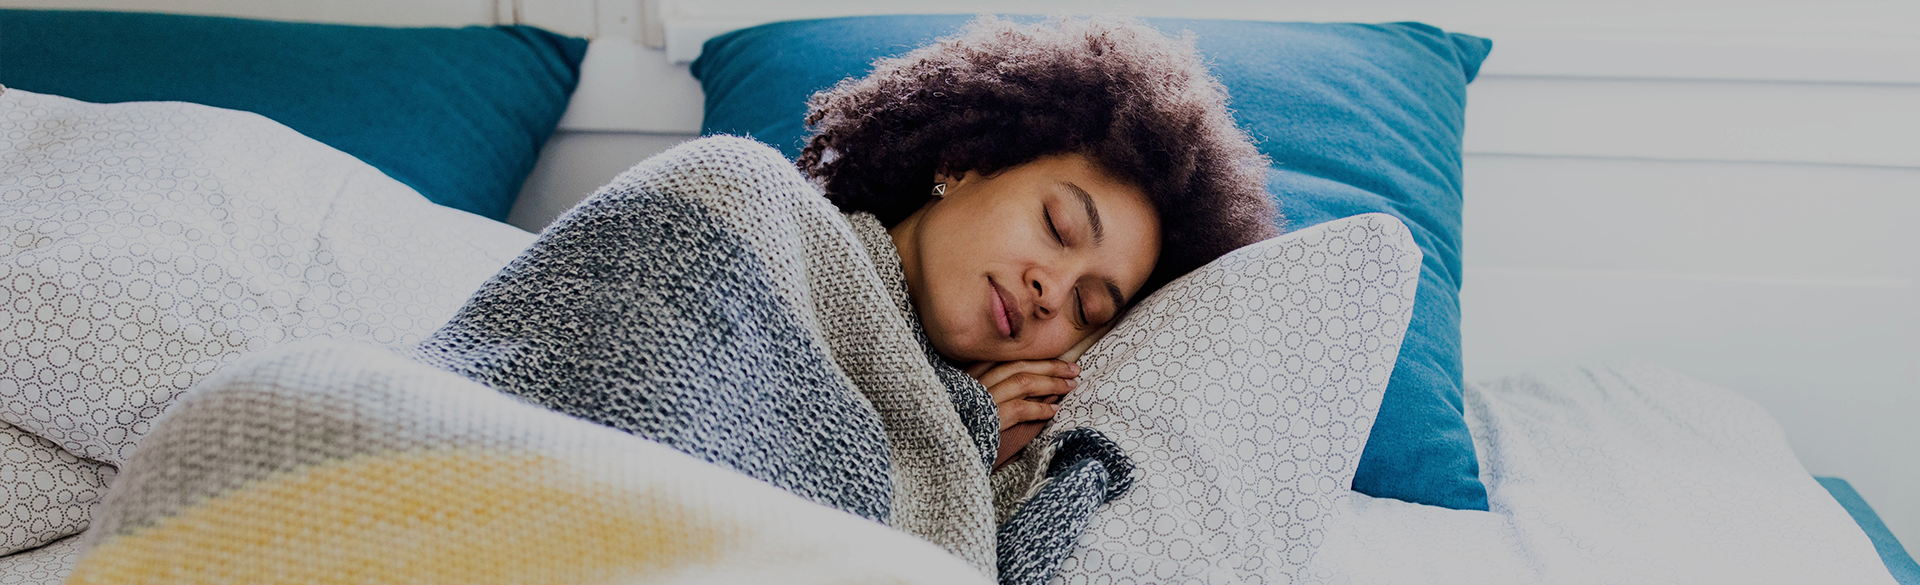 Brown, Pink, or White — What Type of Sound is Best for Boosting Sleep? | CU School of Medicine